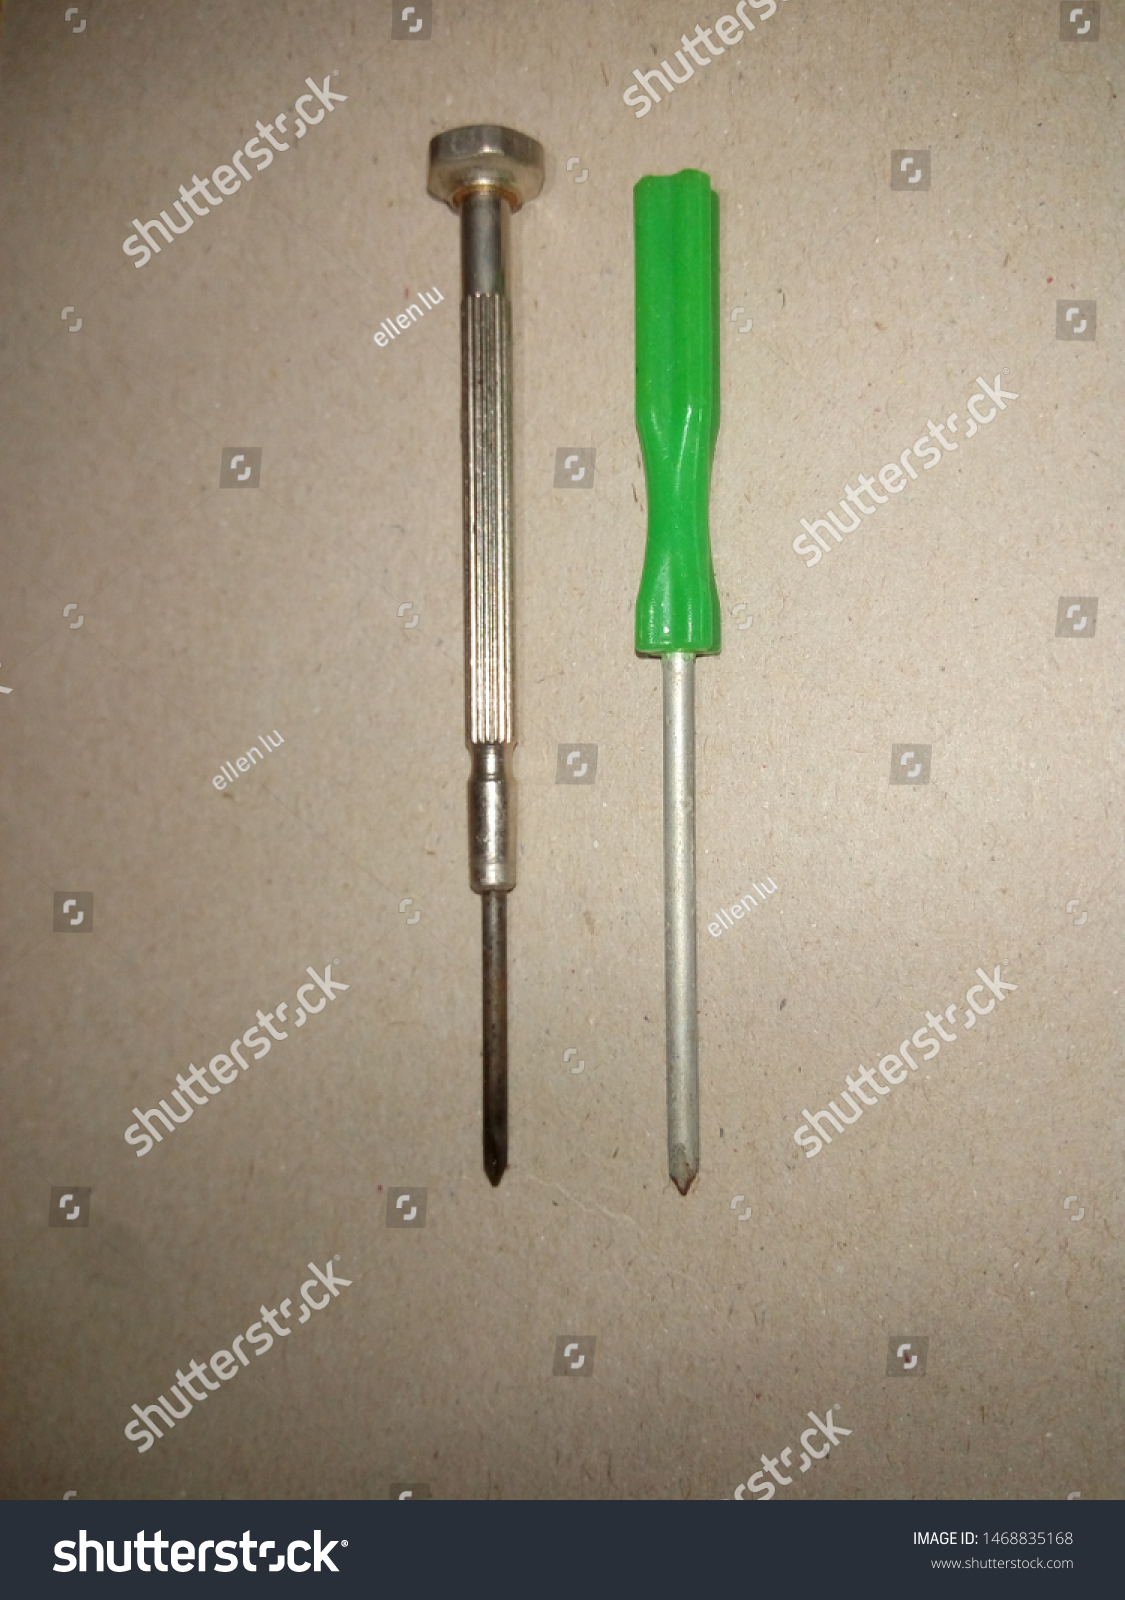 two screwdriver ,head screwdriver with green plastic handle and Precision screwdriver ,on gray background #1468835168